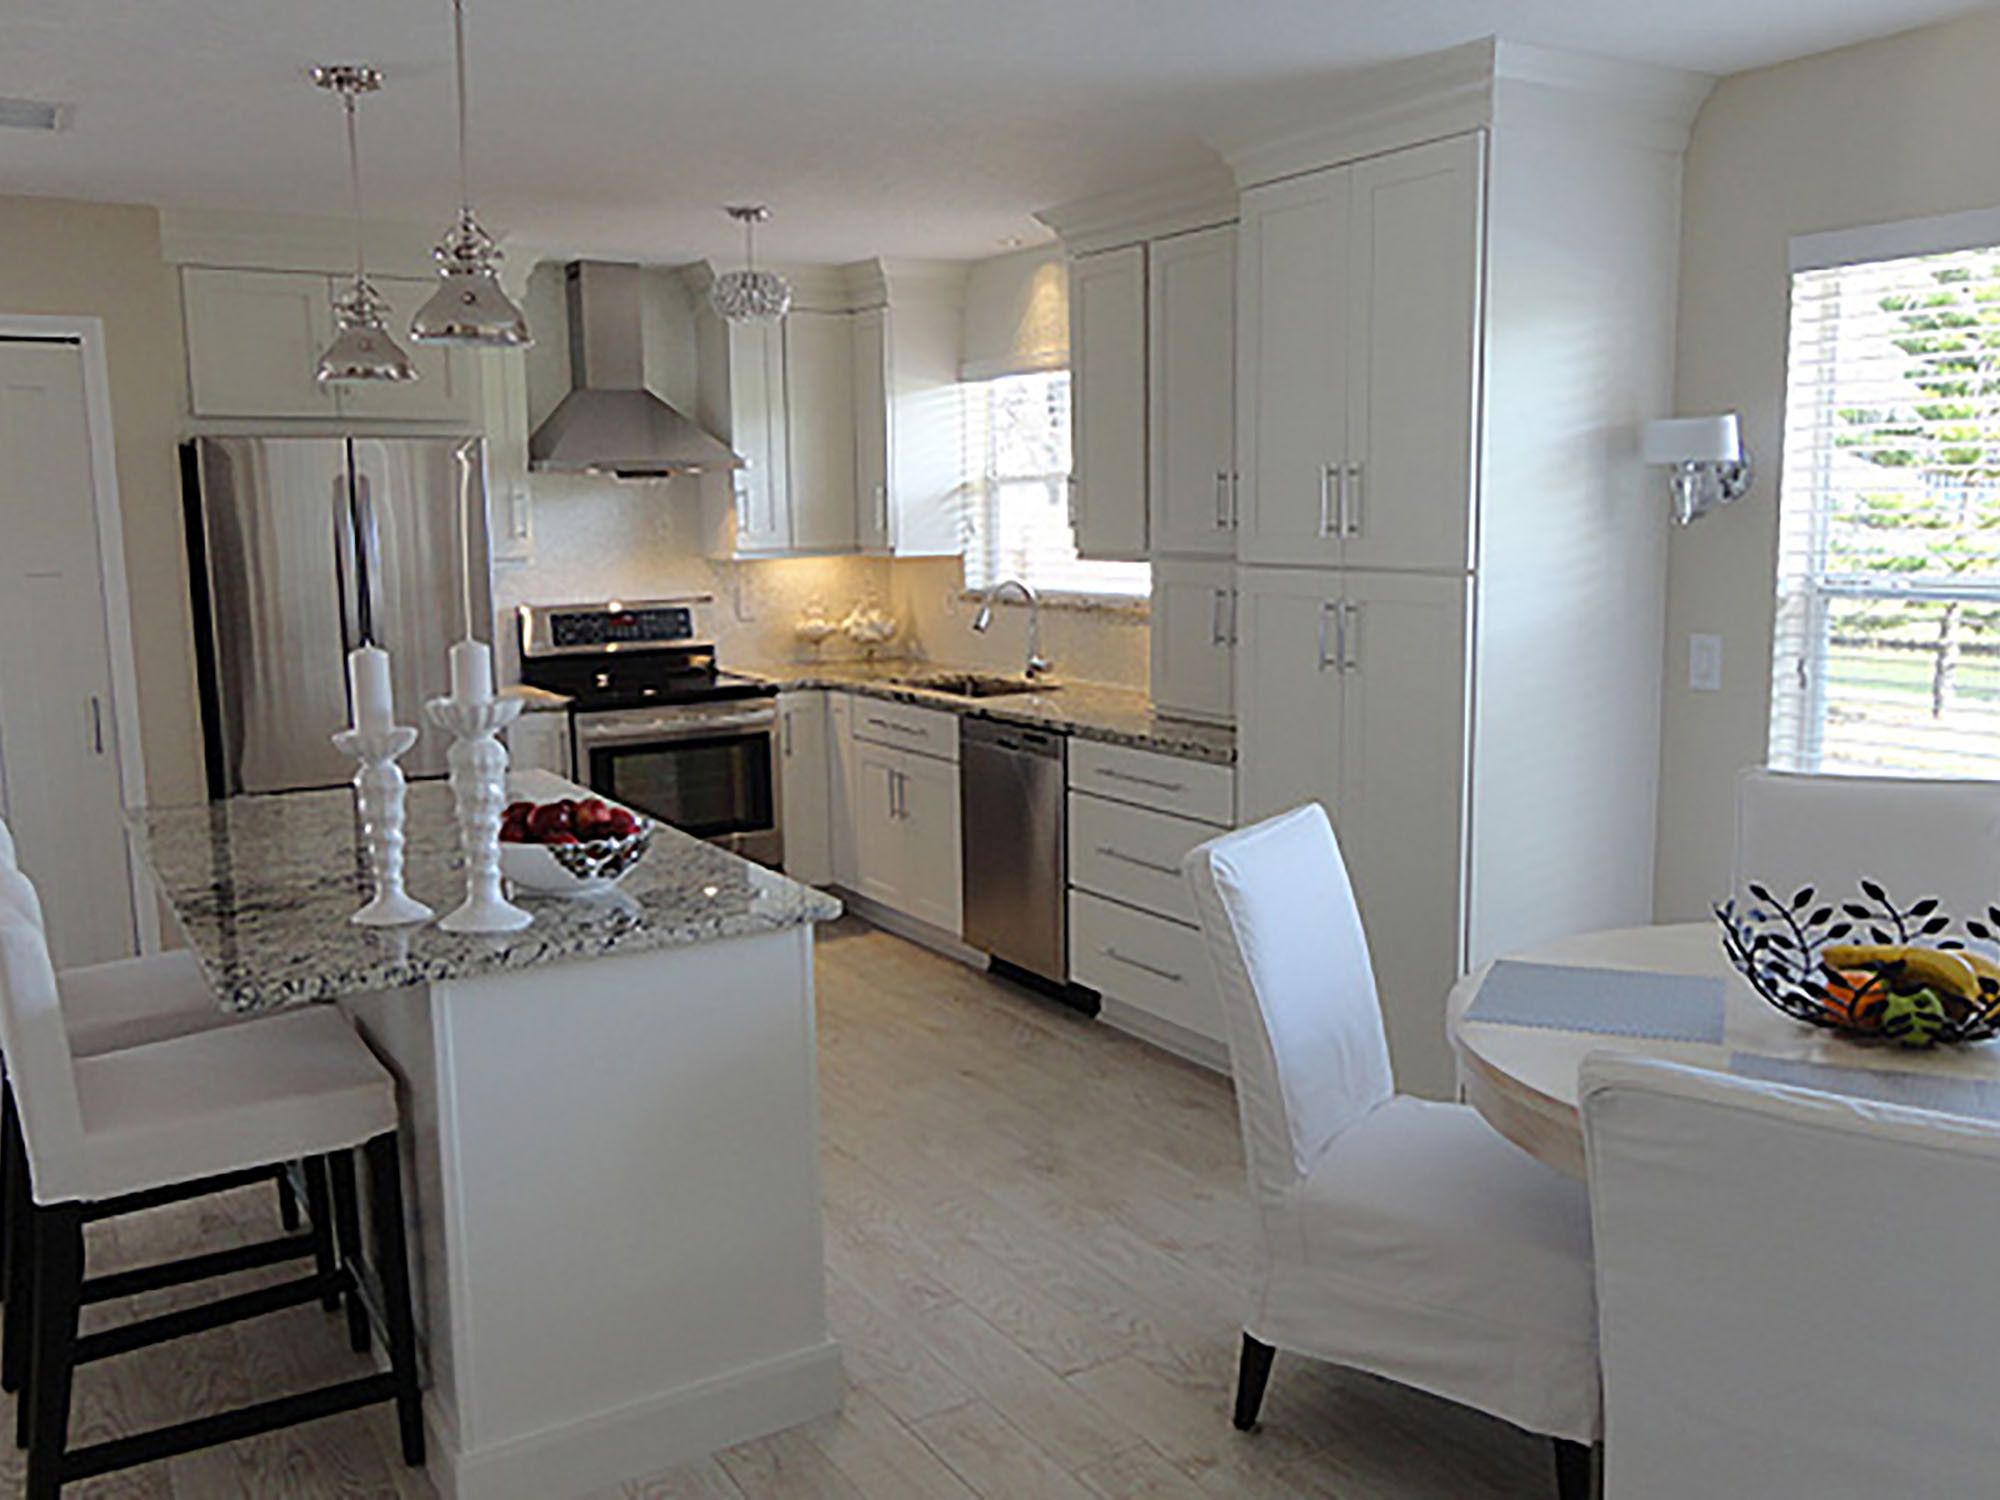 Kitchen Remodeling White Cabinets
 Shaker White Painted Cabinets Florida Kitchen s